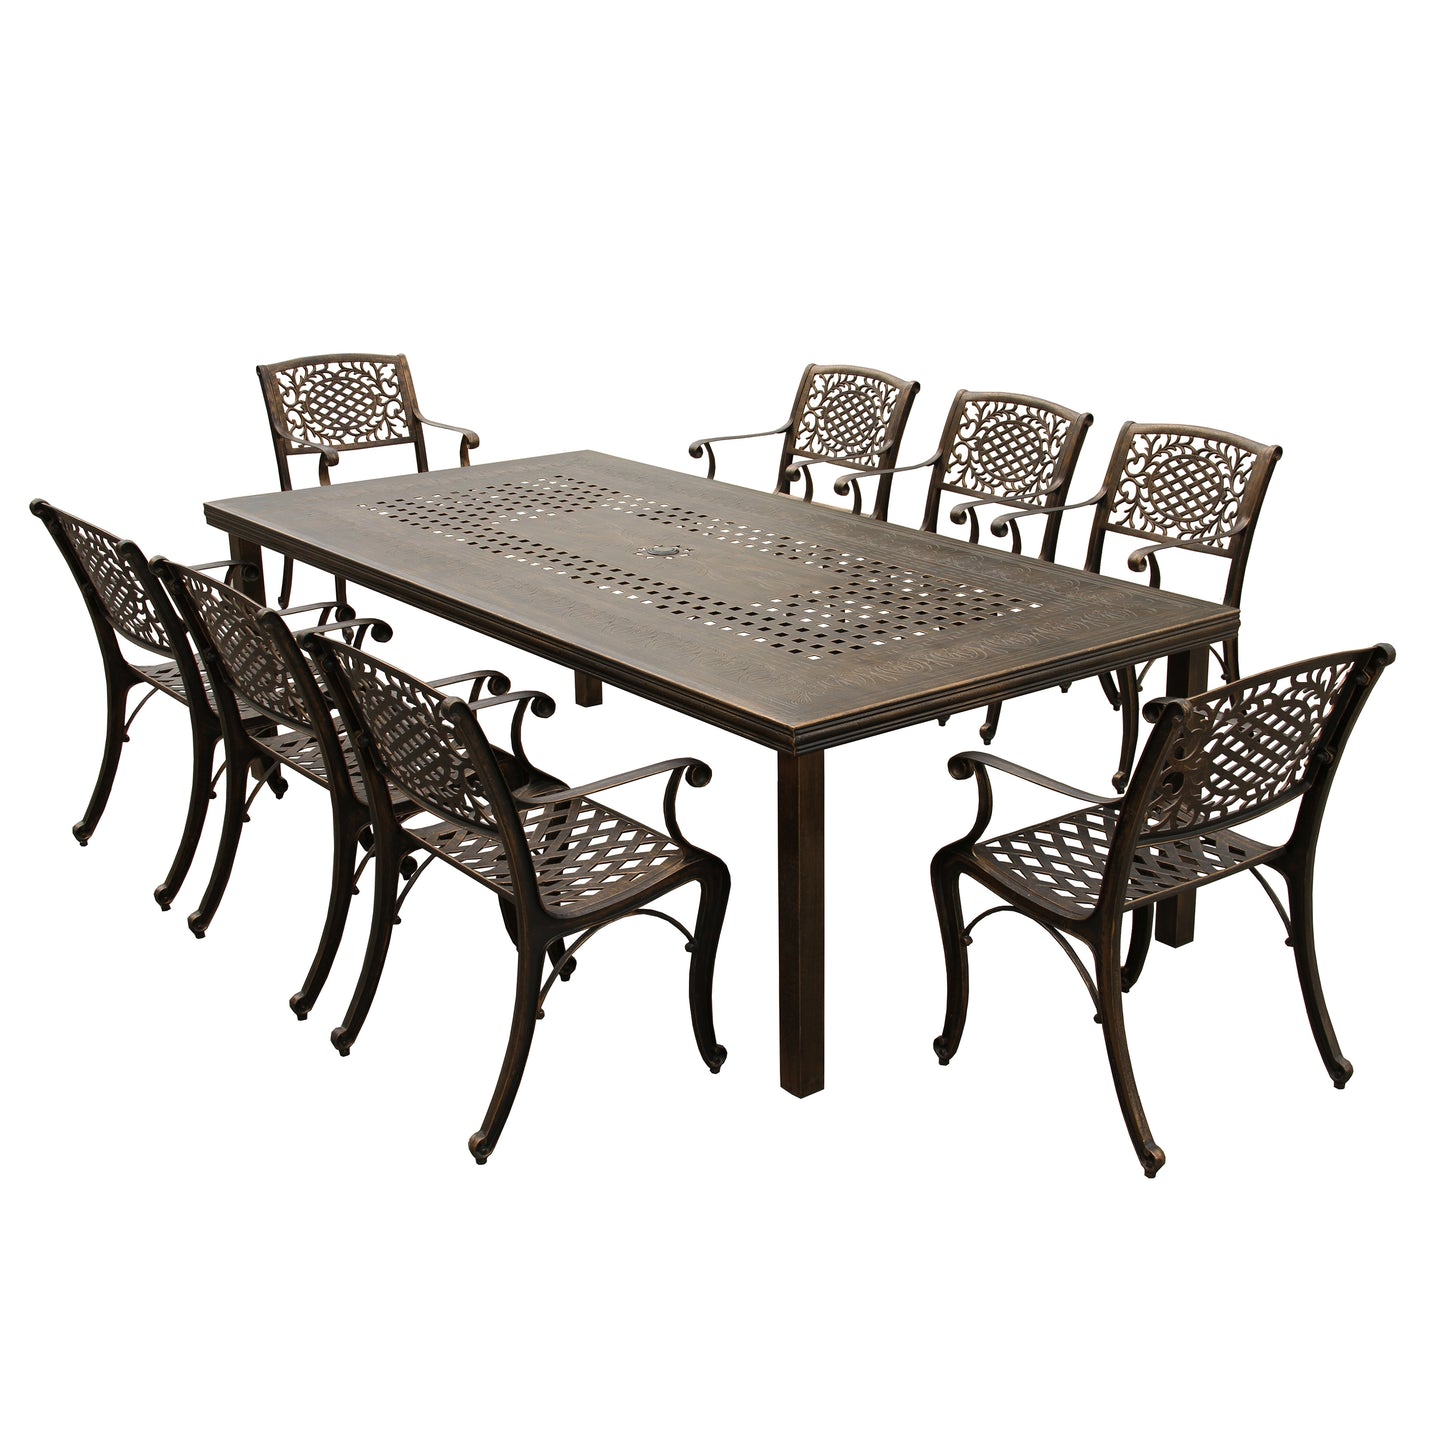 Outdoor Aluminum 9pc Rectangular Patio Dining Set with Eight Chairs